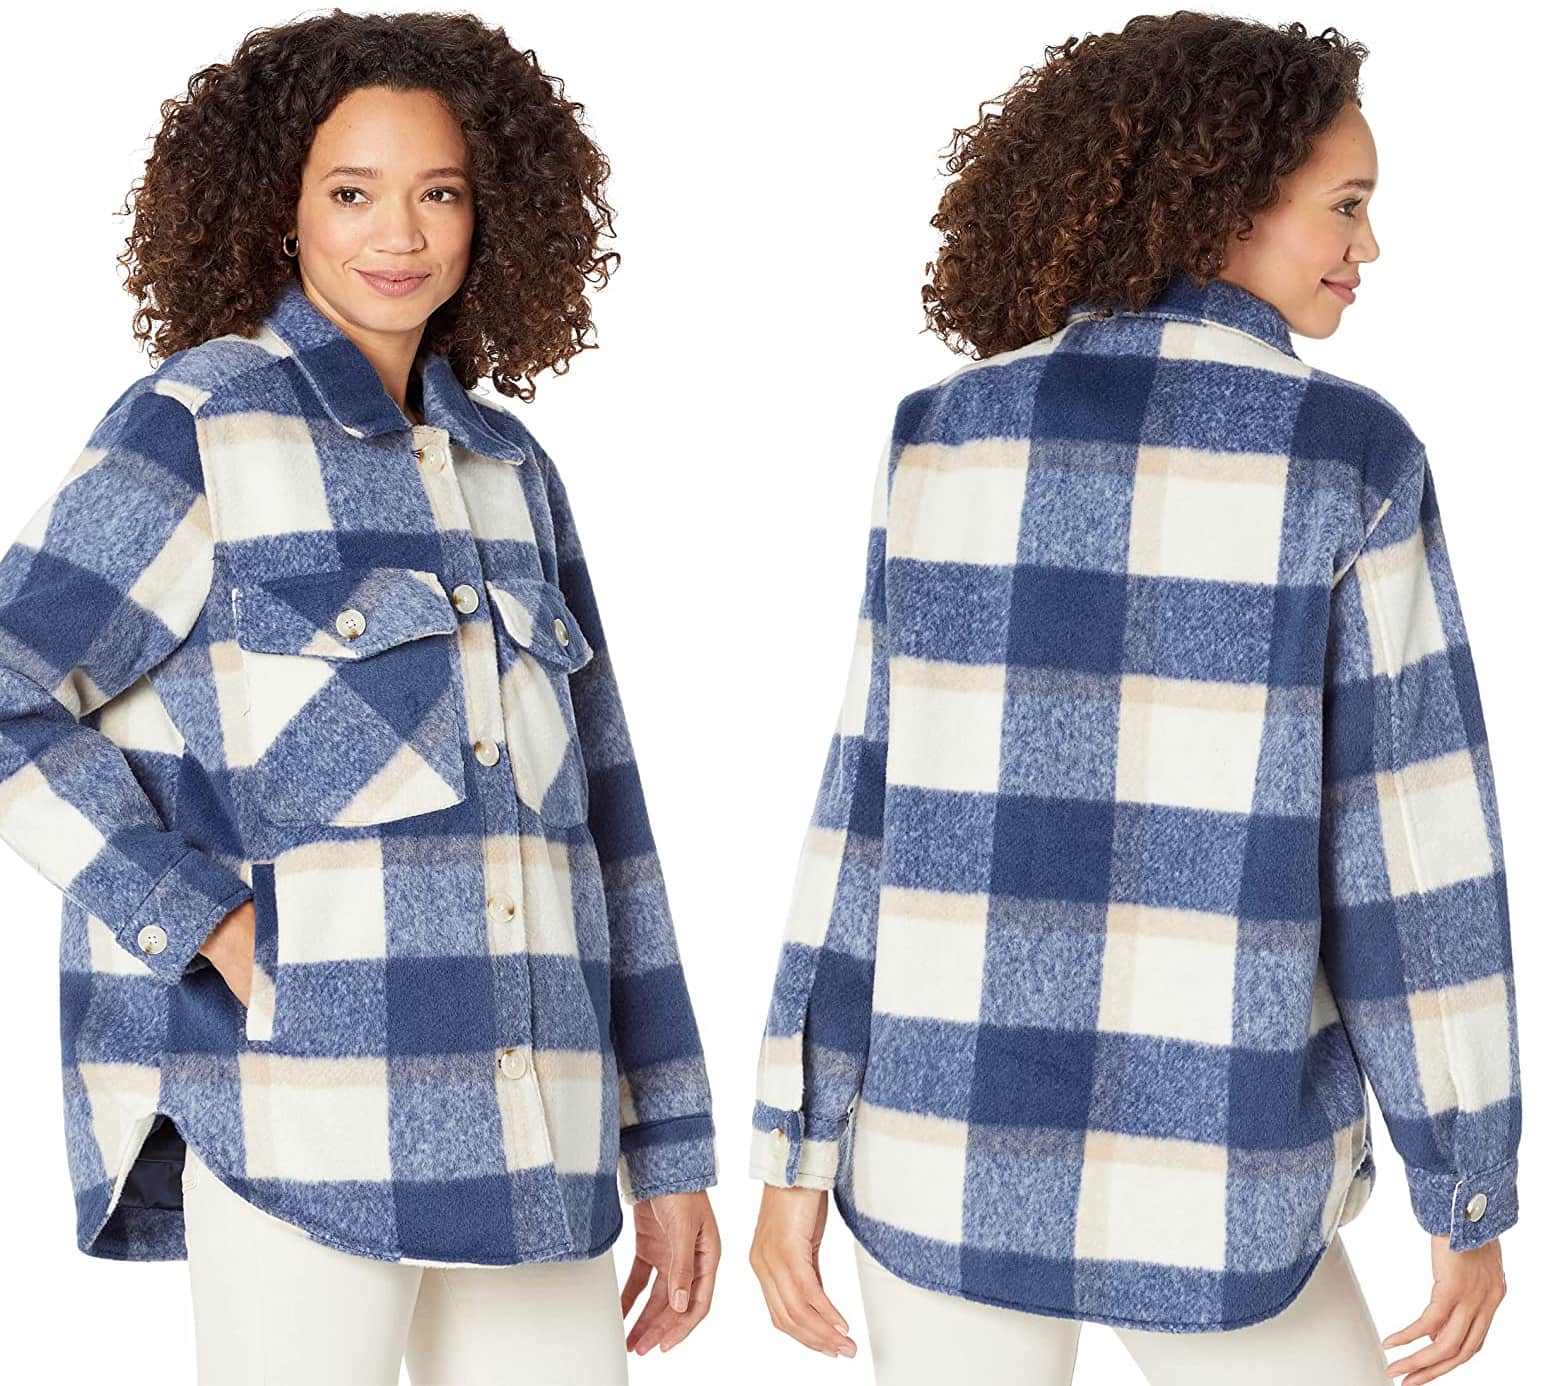 Casual elegance defined, Blank NYC's plaid shirt jacket with a relaxed fit, point collar, and practical pockets